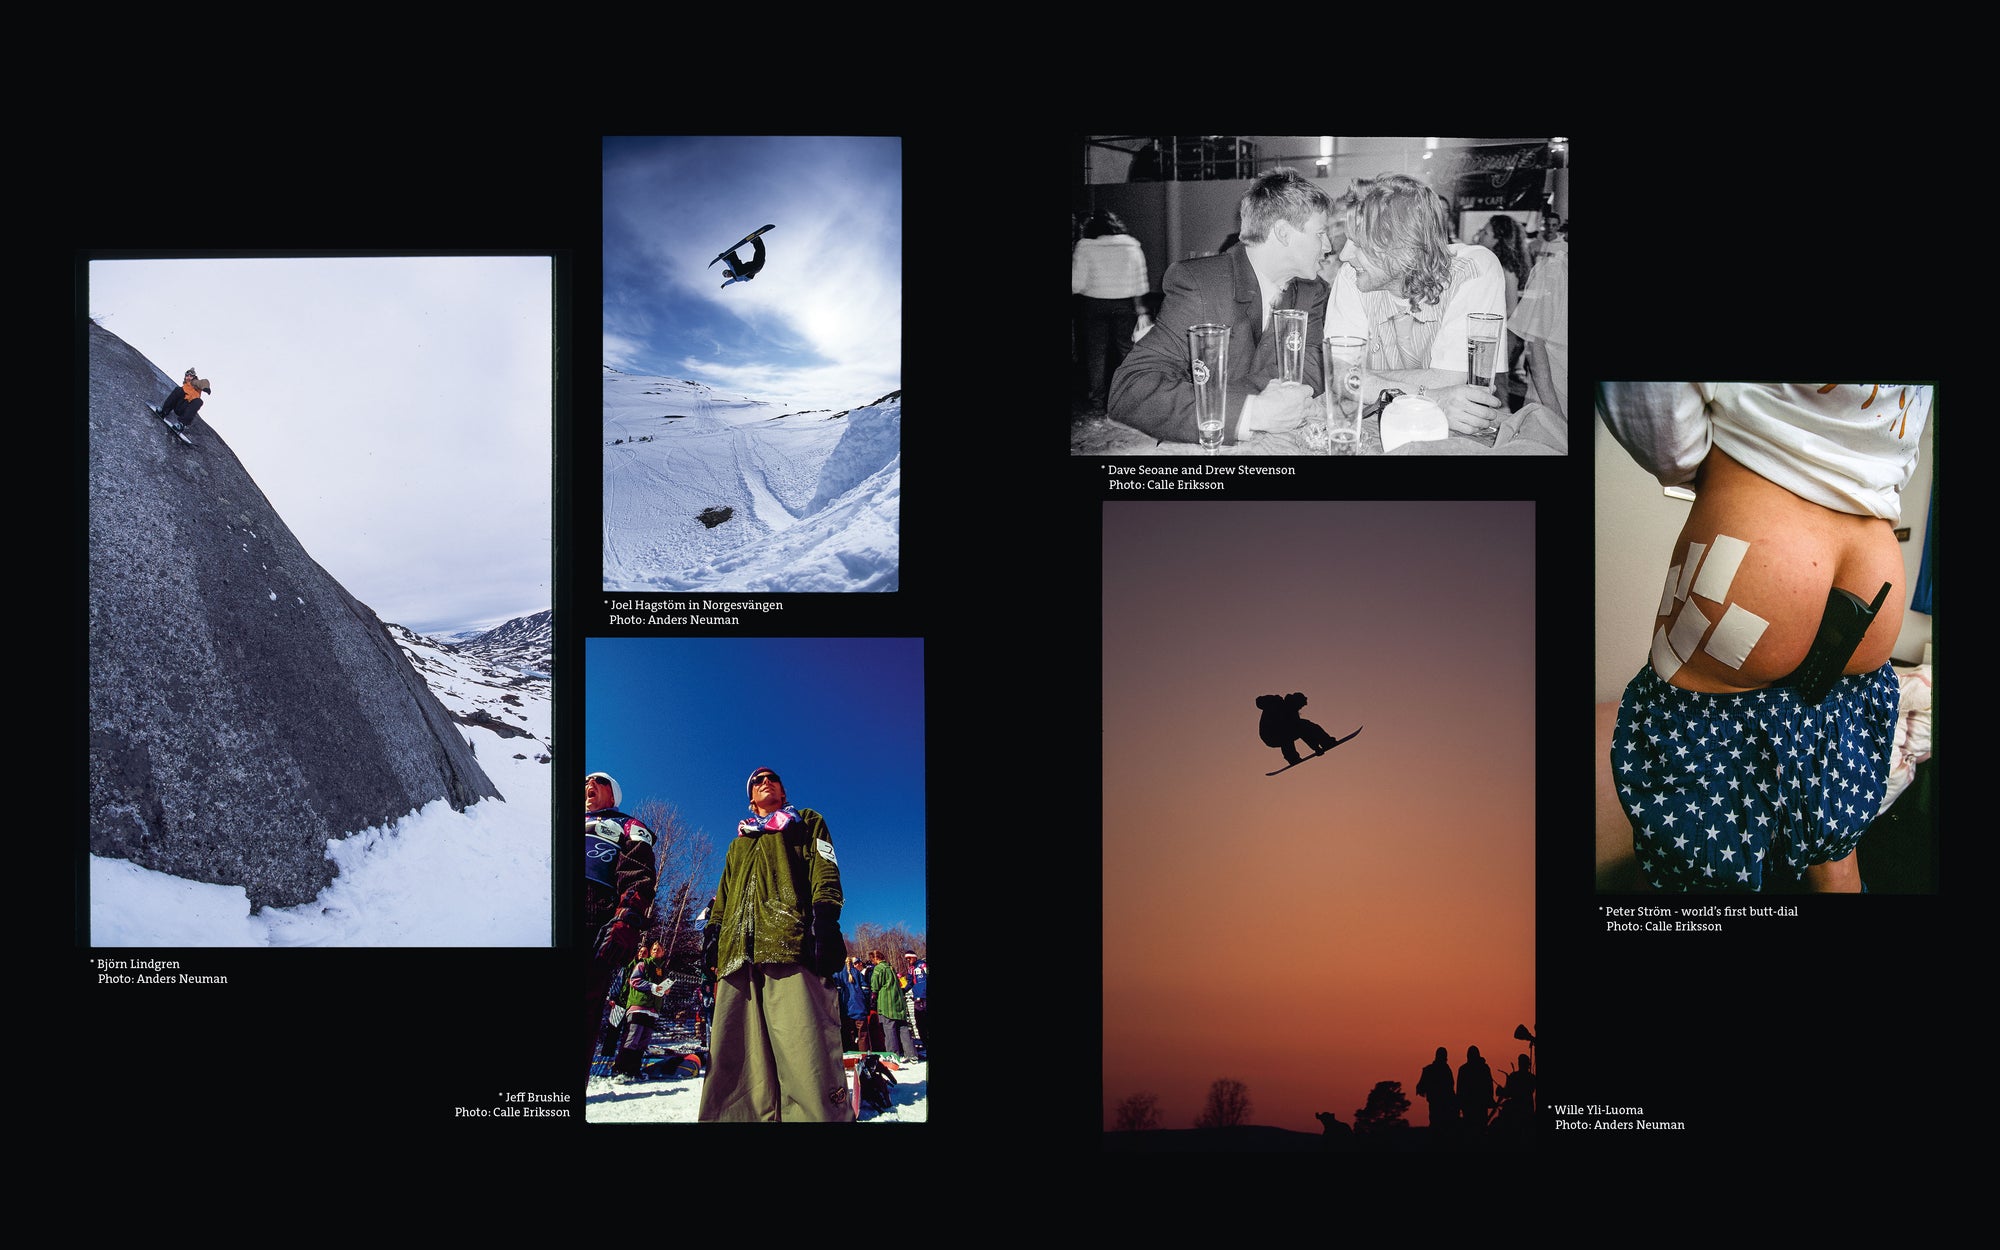 Hold Fast, Tweak Hard: Ingenuity, Insanity and 25 Years of European Snowboarding's Most Infamous Title, Method Magazine